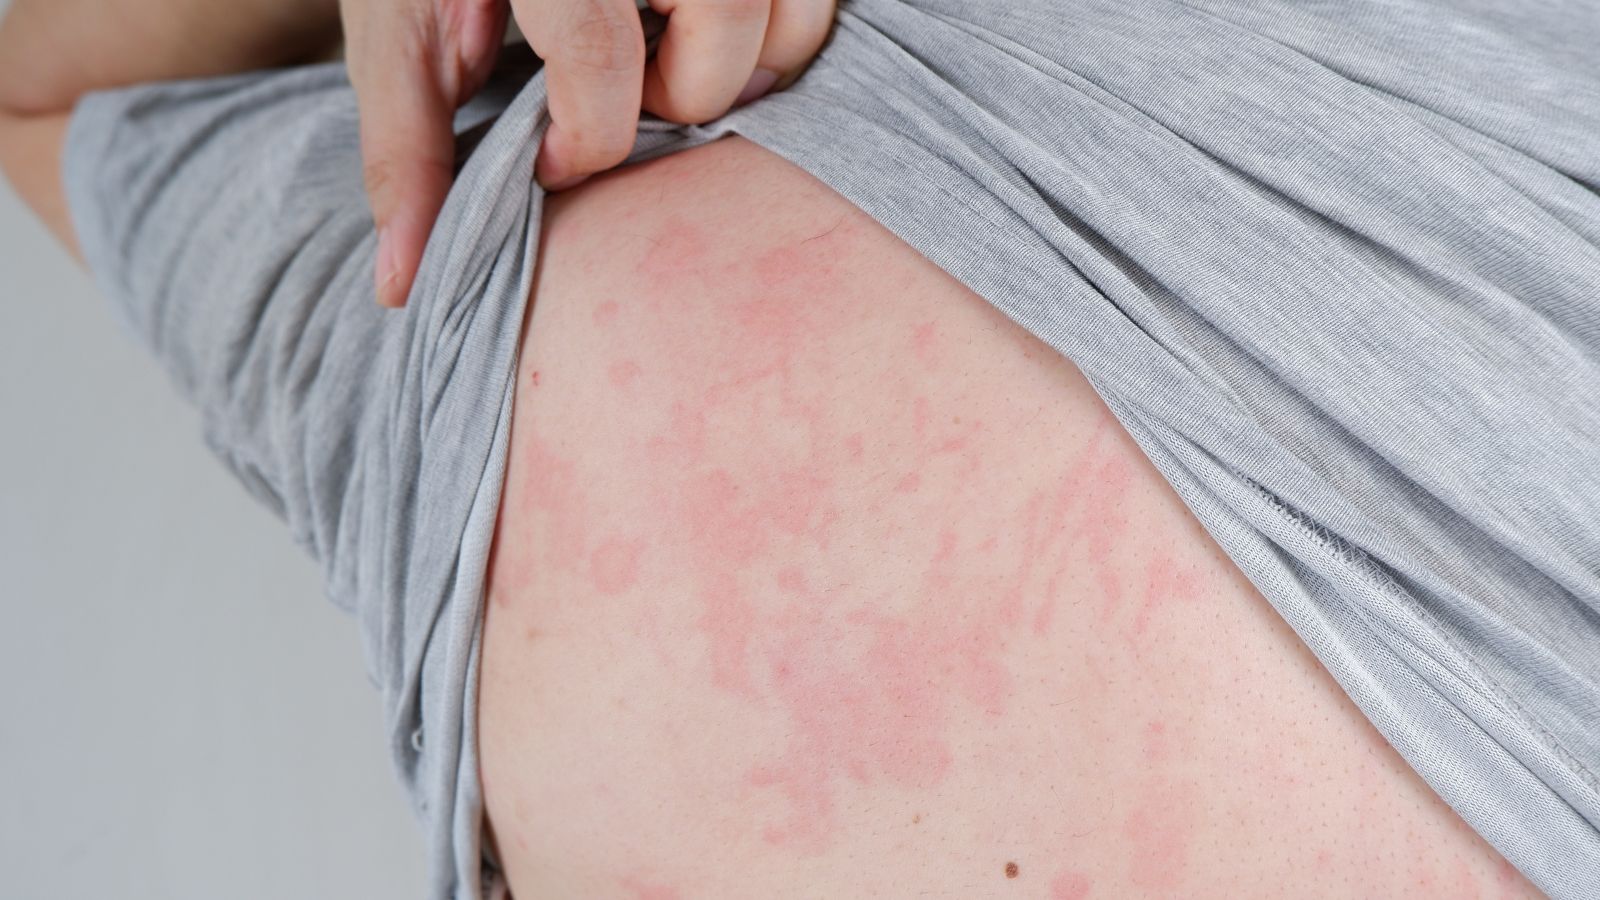 Close-up image of skin suffering severe urticaria on the back.